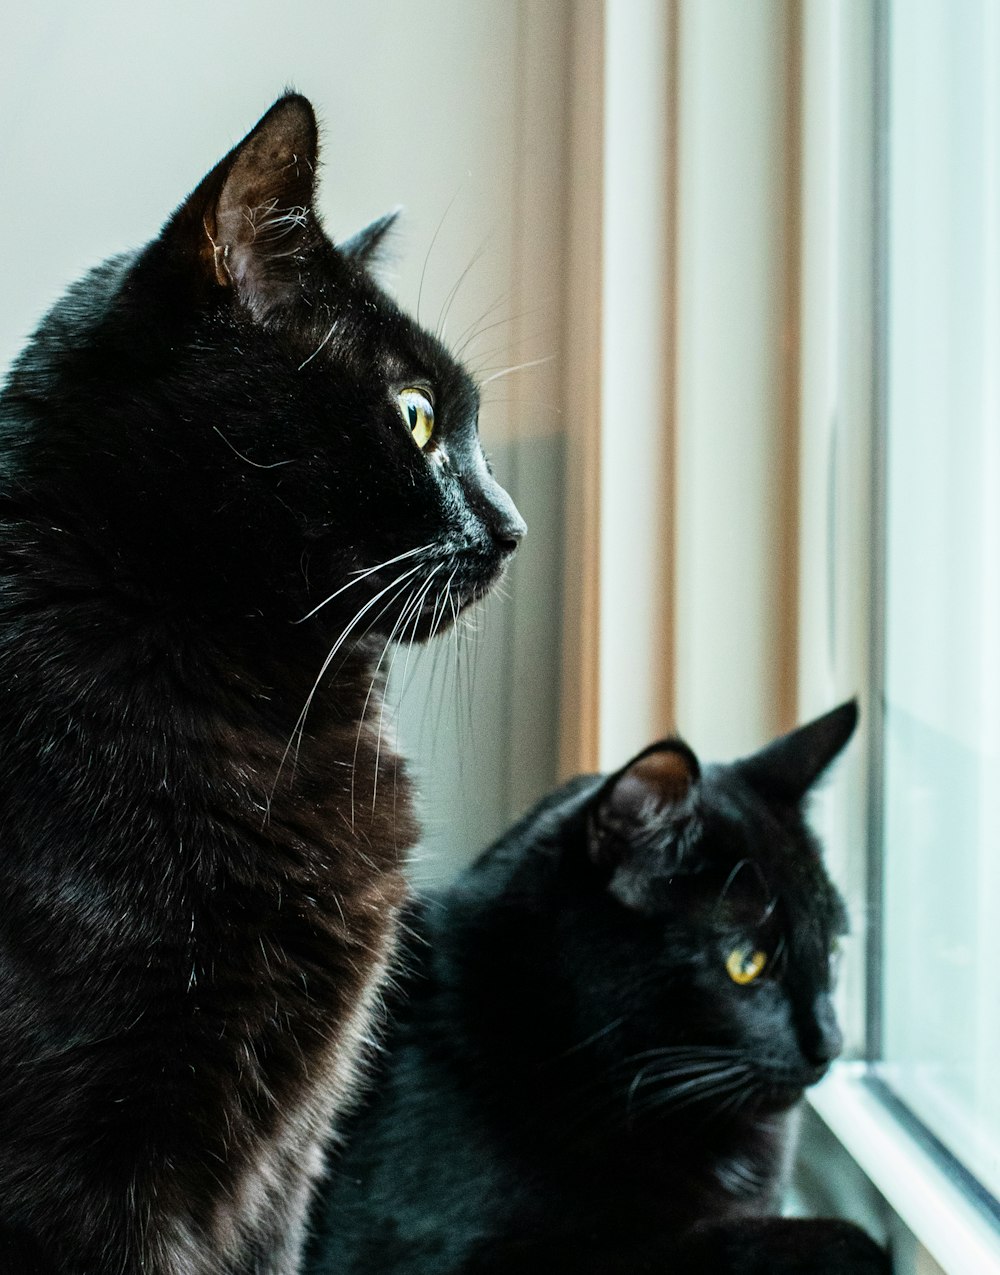 two black cats looking outside a glass window